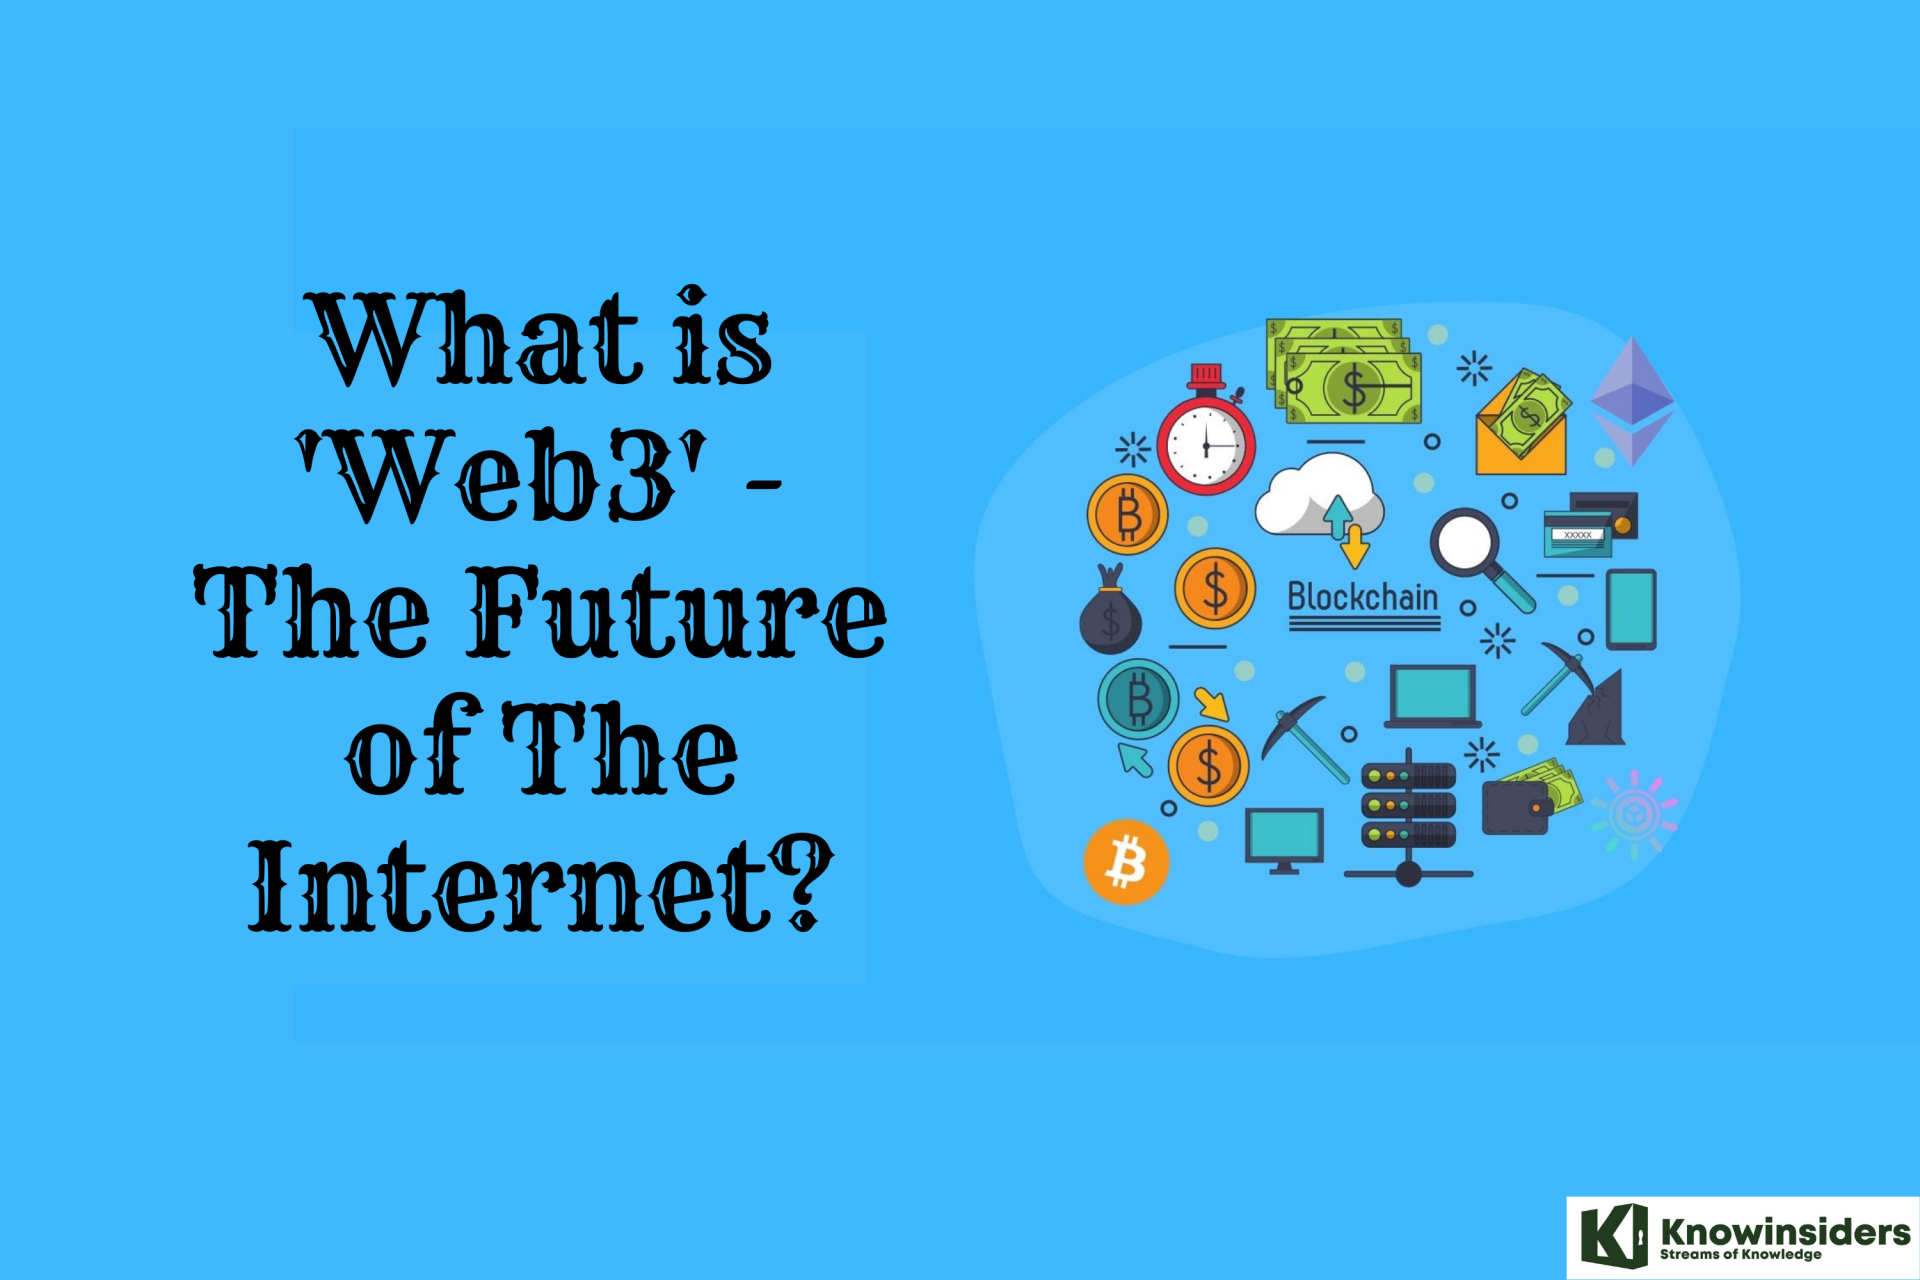 What is 'Web3' - The Future of The Internet?